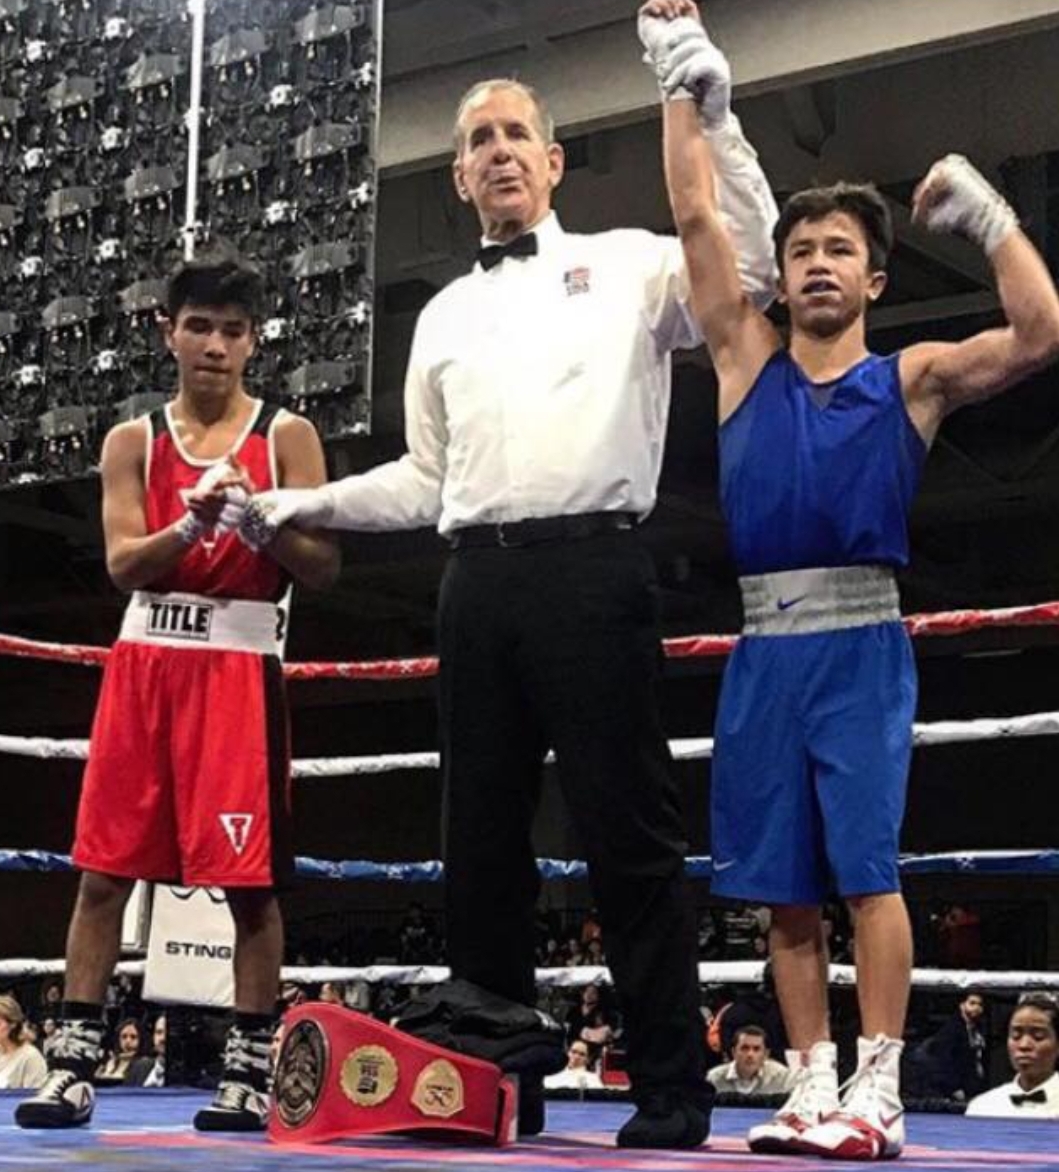 Merced student wins USA Boxing Nationals in Salt Lake City